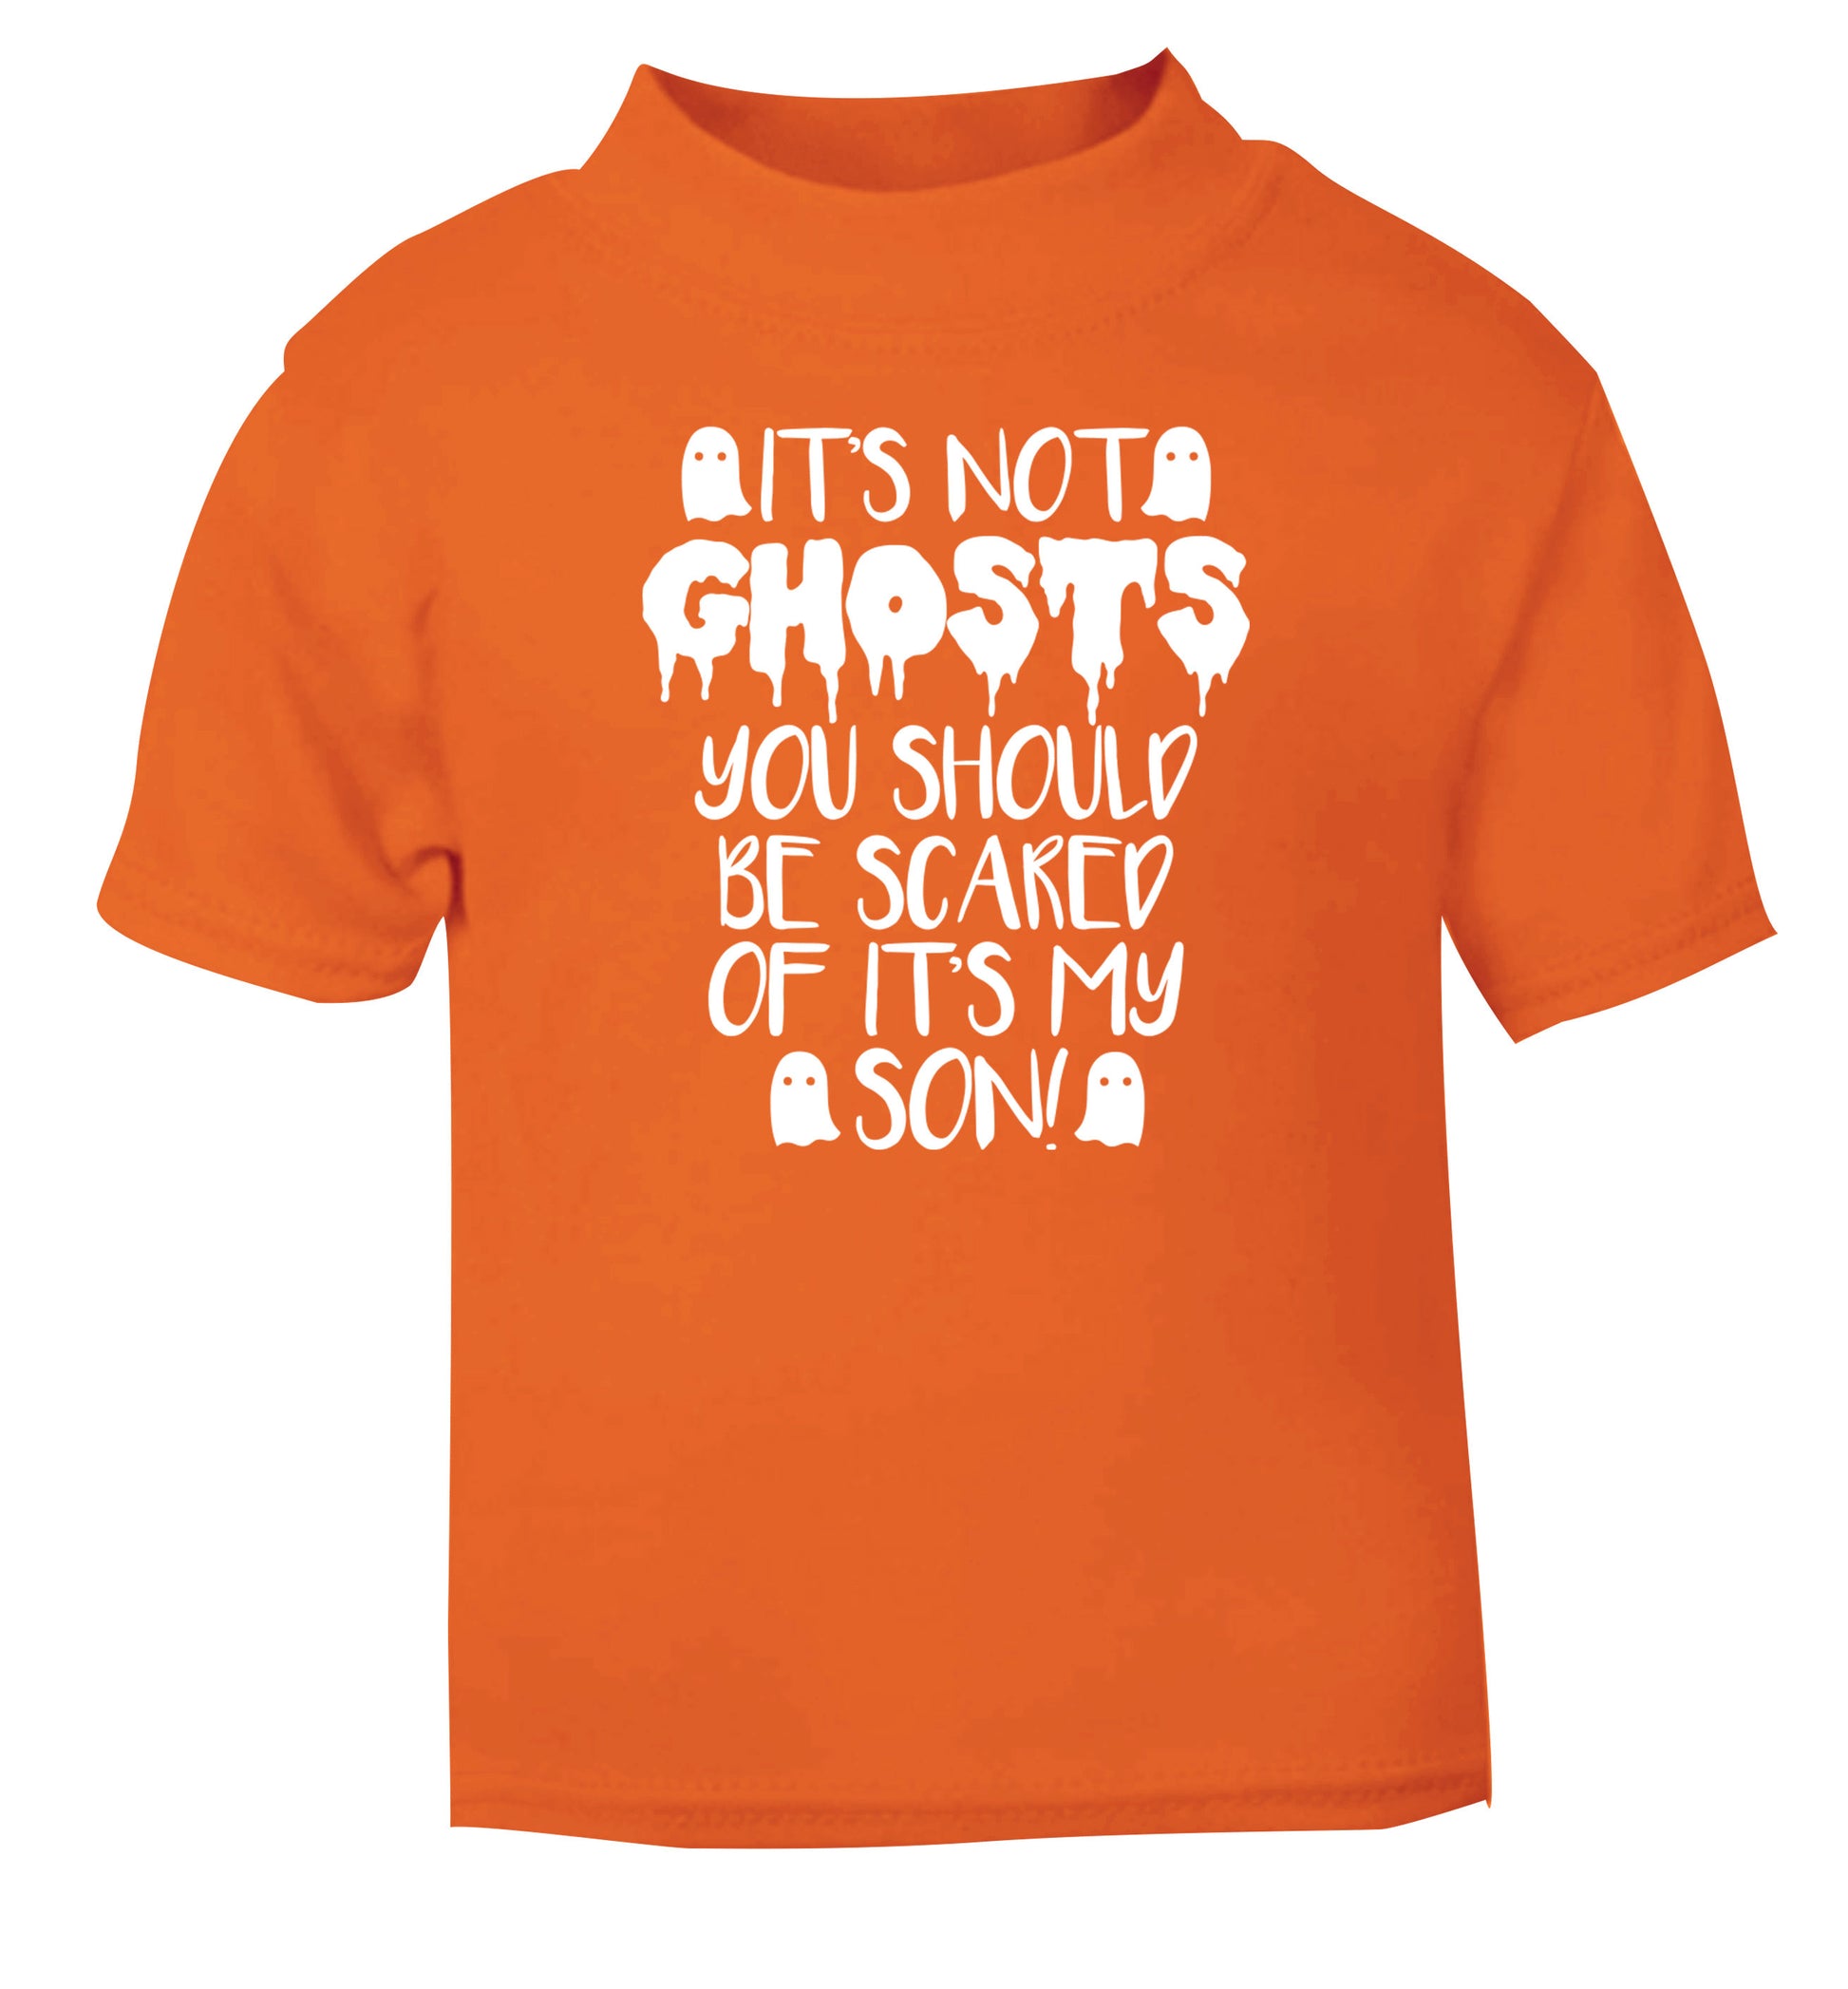 It's not ghosts you should be scared of it's my son! orange Baby Toddler Tshirt 2 Years